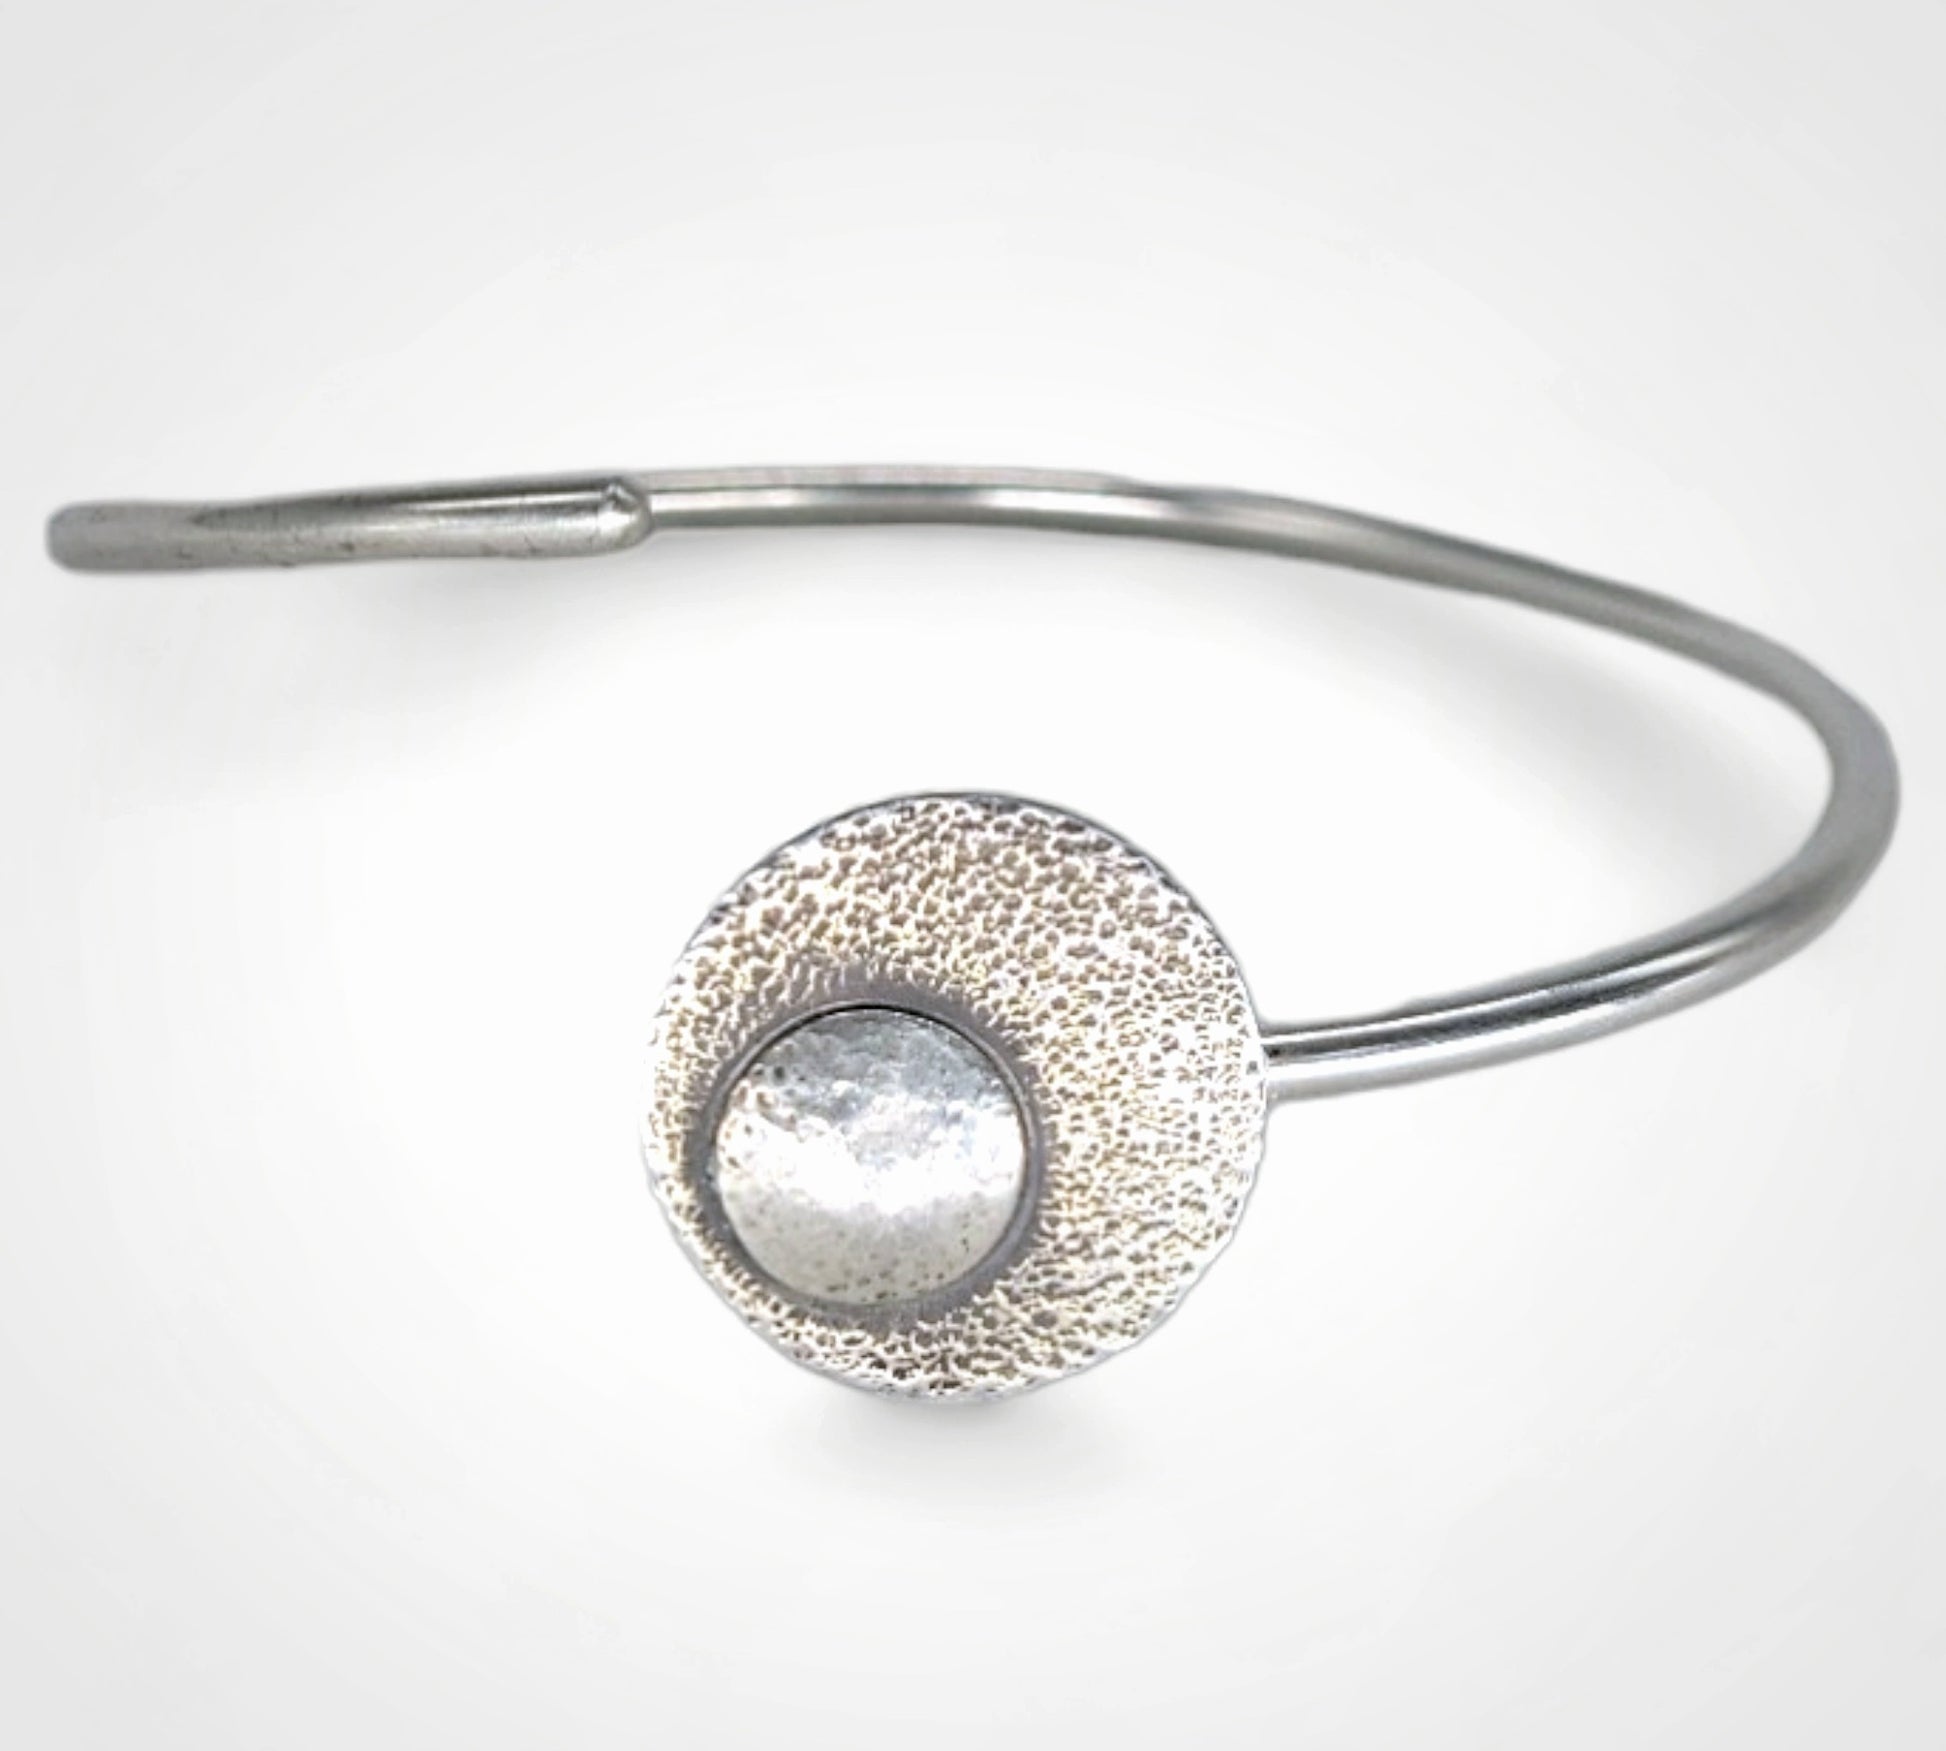 These silver moon bracelets remind you to reflect on your prior successes to overcome present challenges.